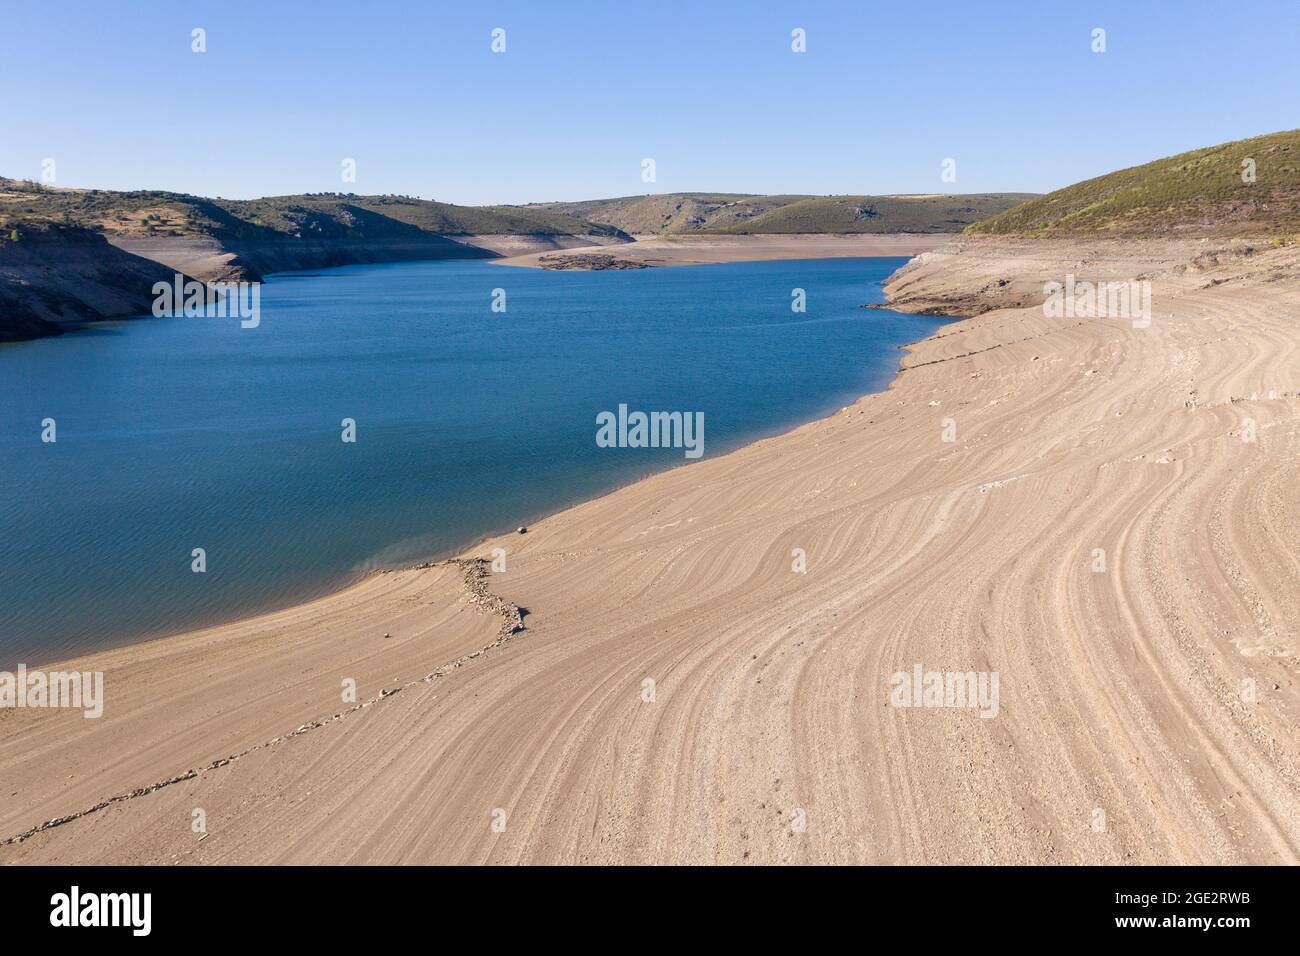 Drought in the Ricobayo reservoir, province of Zamora, Spain Stock Photo